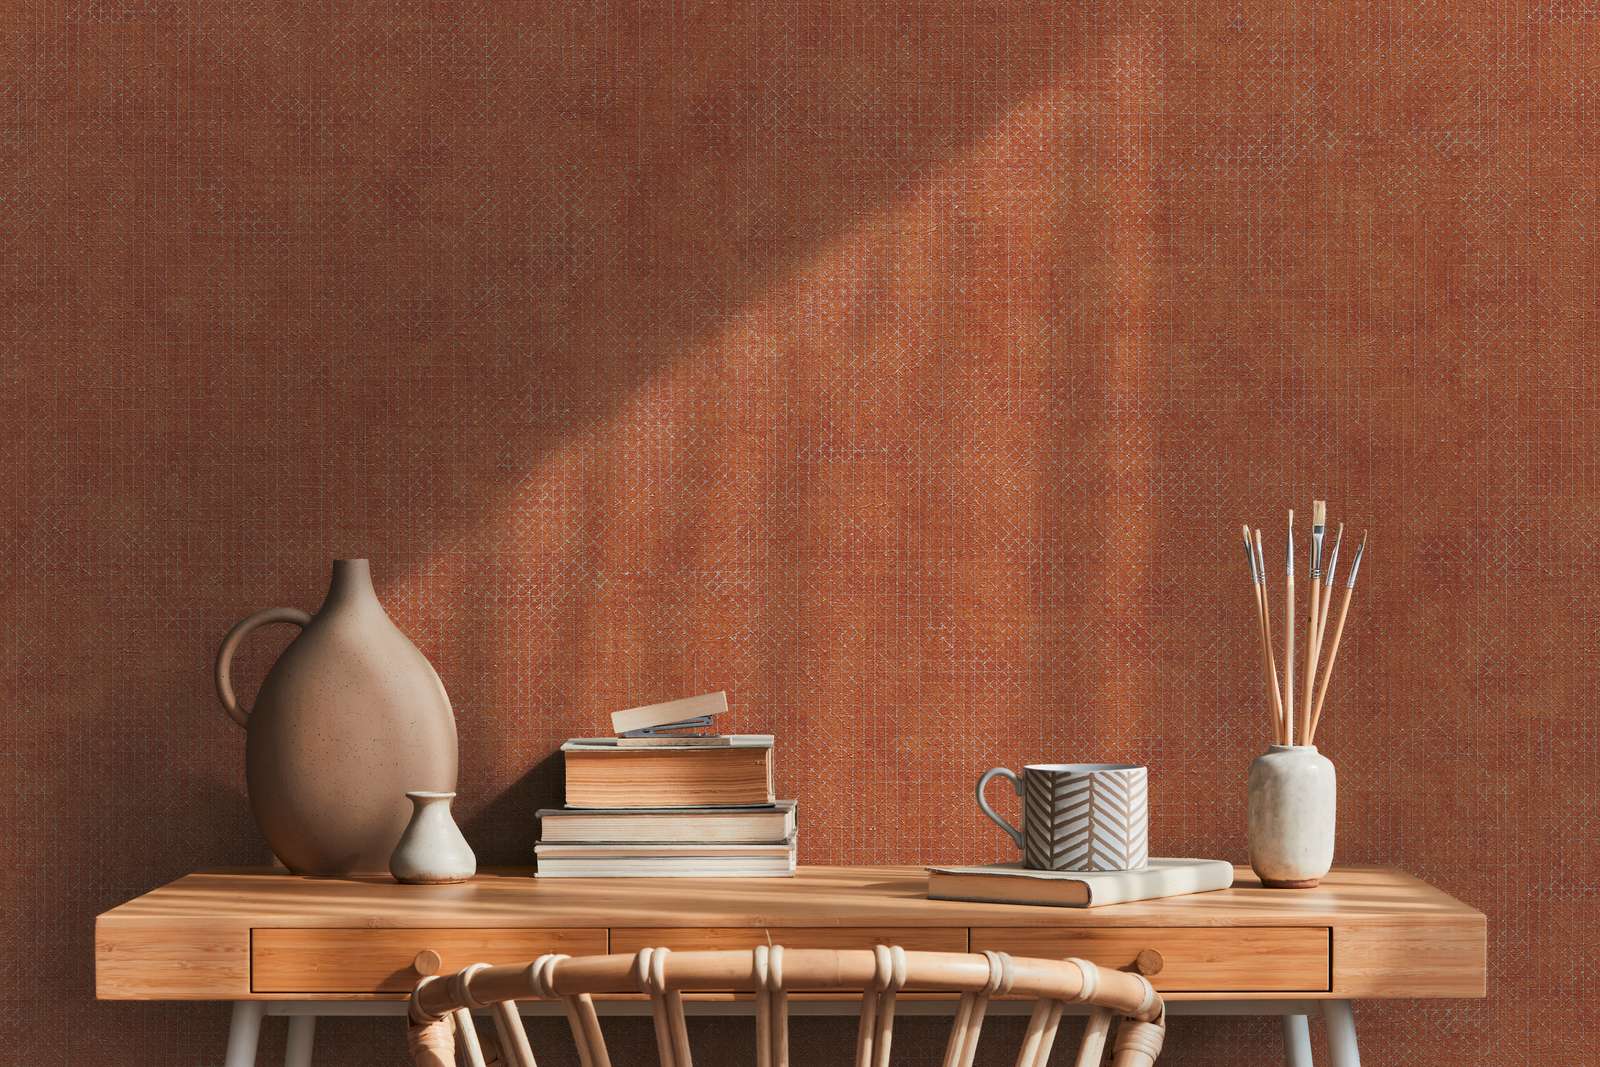             Brick red wallpaper with silver texture pattern - orange, red
        